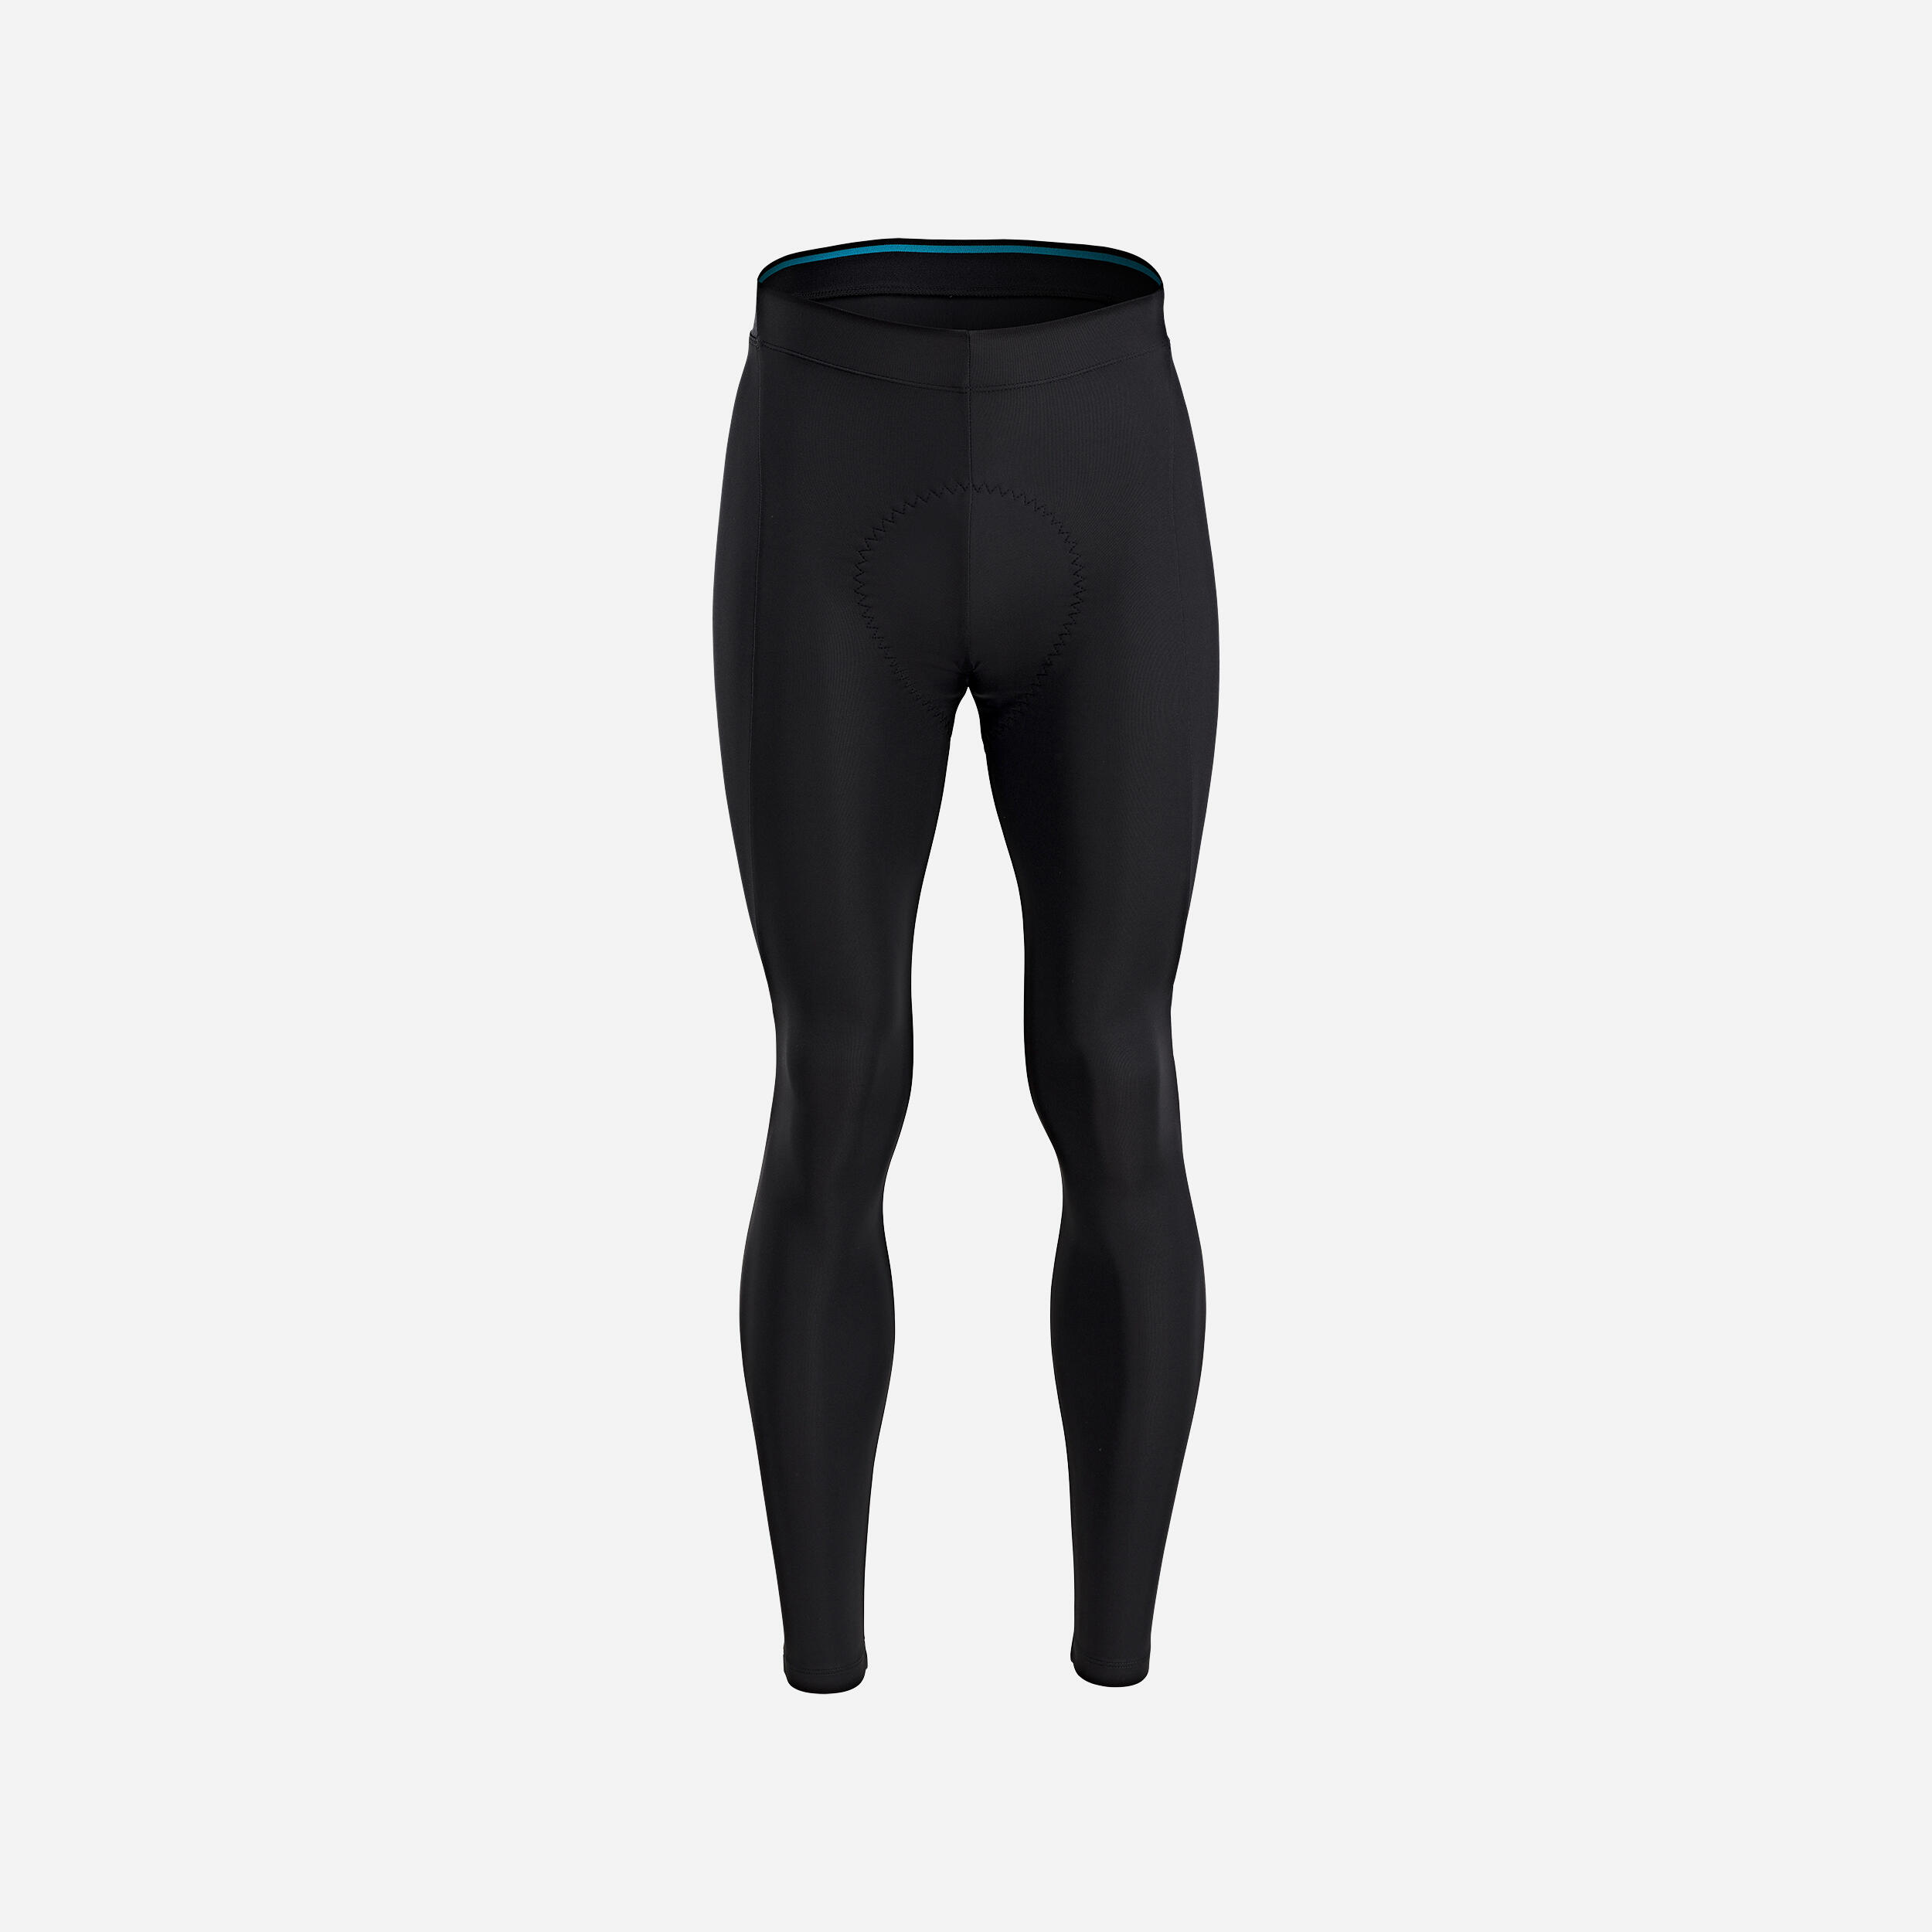 Sikma Mens Cycling Tights Winter Thermal Padded Trousers Legging